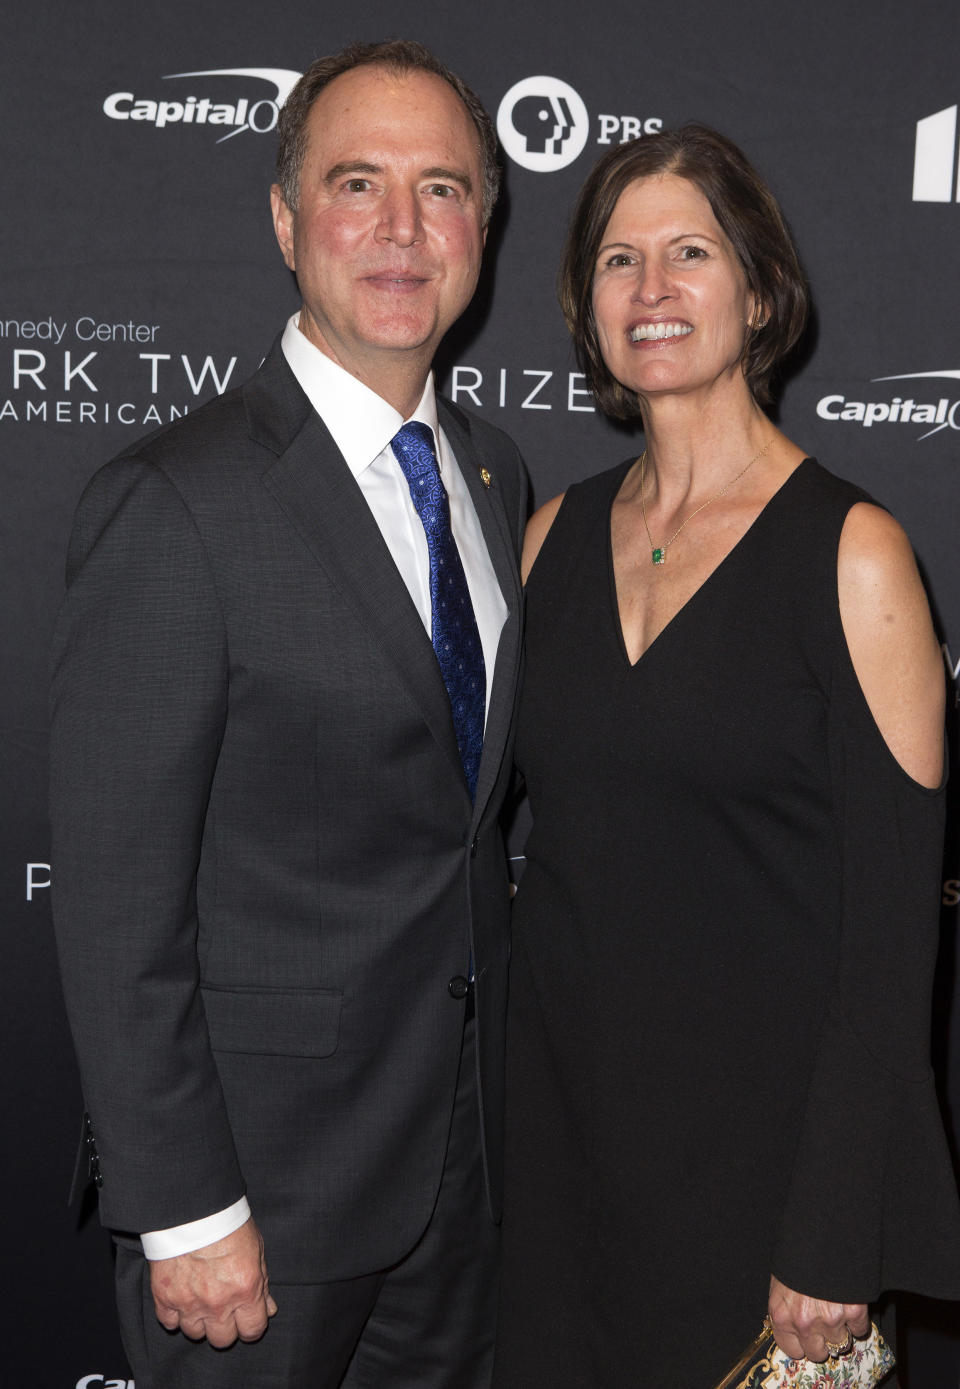 Adam Schiff and his wife Eve arrive at the Kennedy Center for the Performing Arts for the 22nd Annual Mark Twain Prize for American Humor presented to Dave Chappelle on Sunday, Oct. 27, 2019, in Washington. (Photo by Owen Sweeney/Invision/AP)